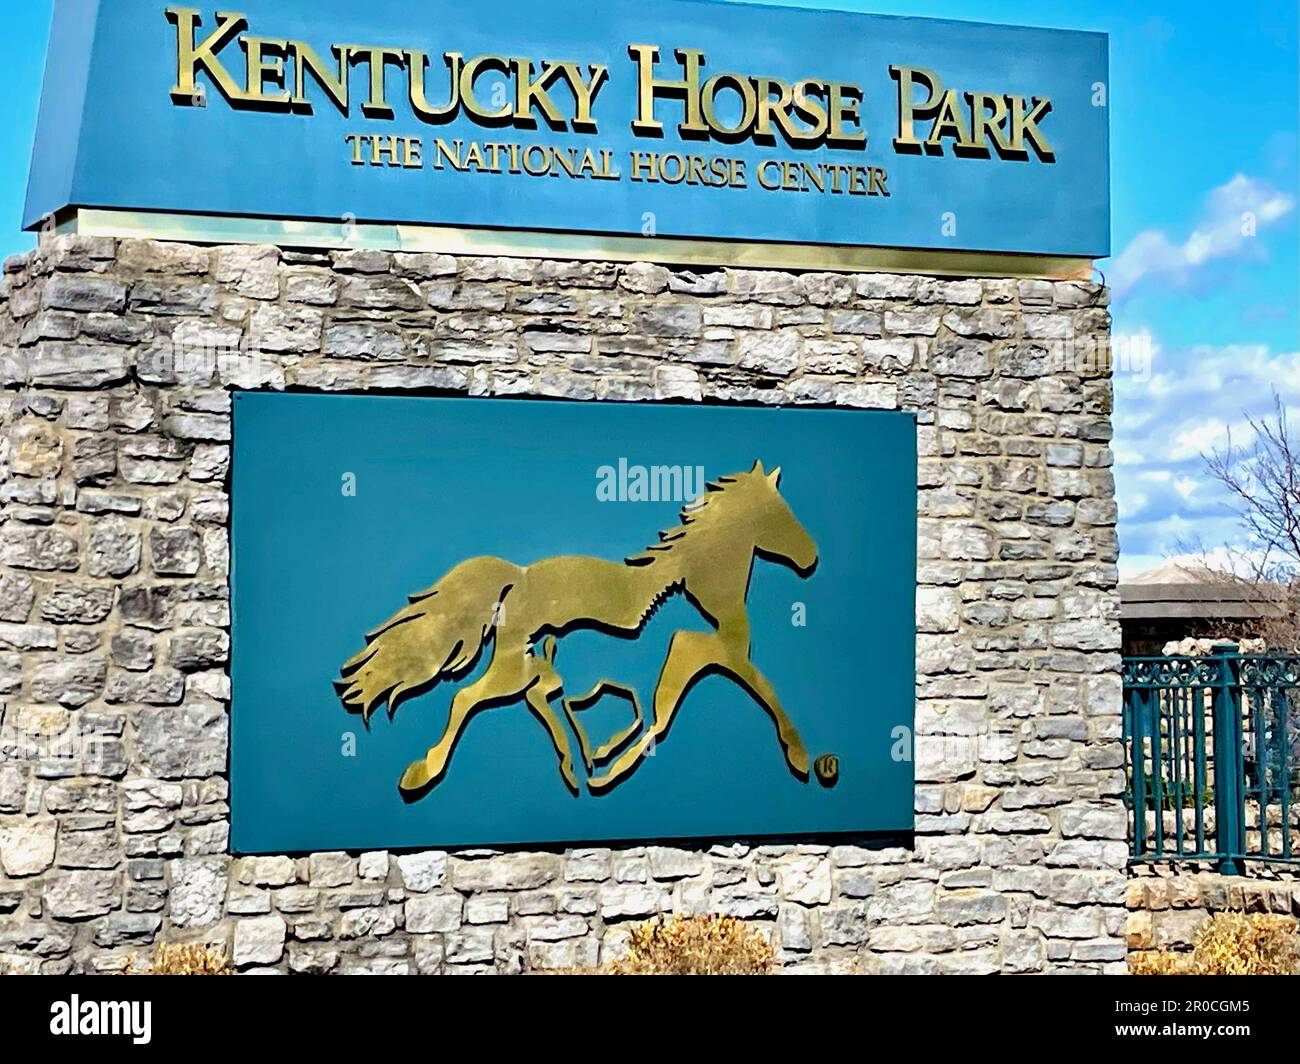 Entrance sign for the Kentucky Horse Park, a tourist destination home to several facilities focused on horse racing, popular in the Bluegrass State. Stock Photo